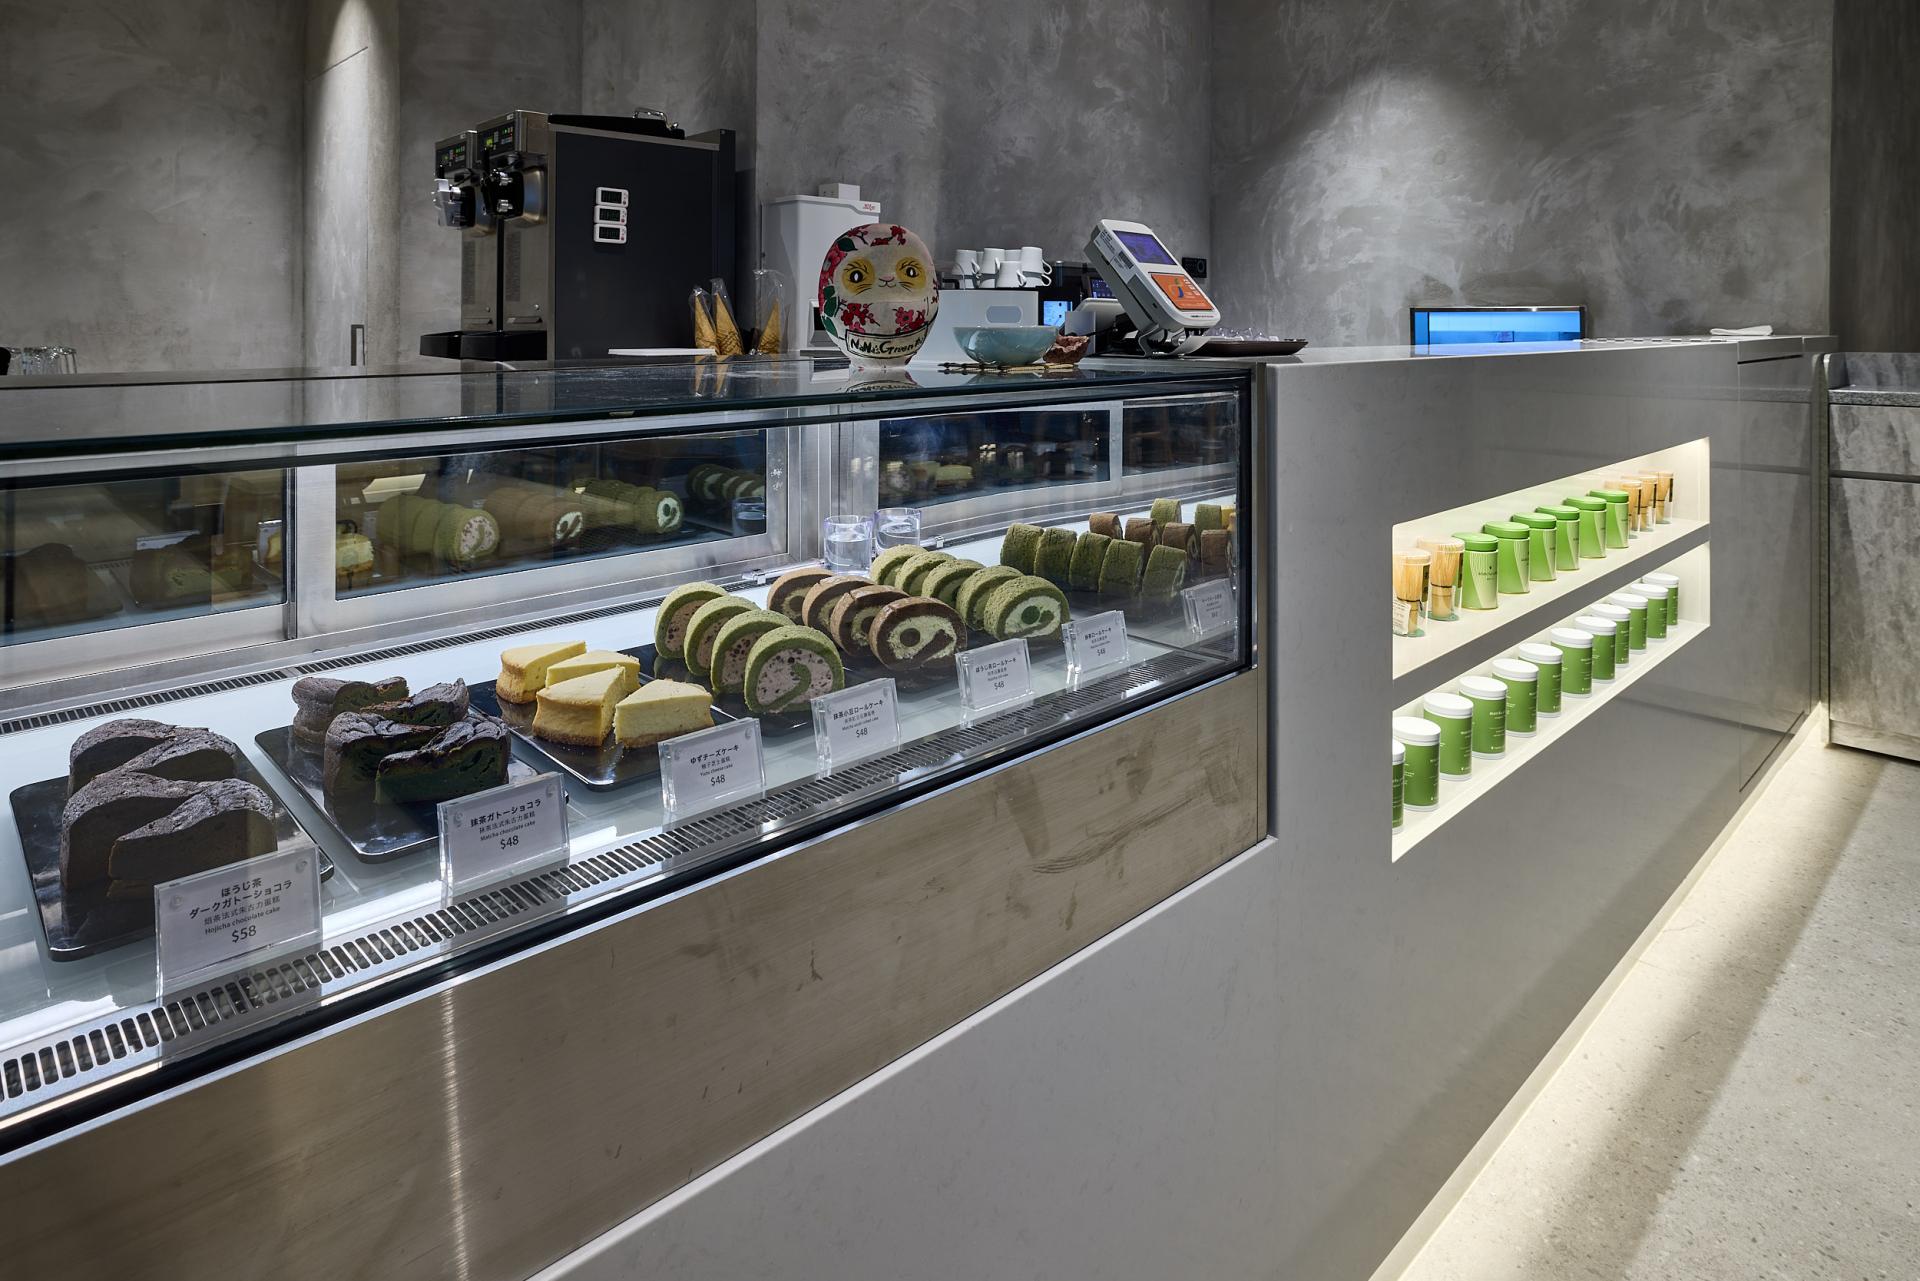 Japanese Cafe Chain Opens New Outlet in Kai Tak's AIRSIDE: Inside Nana’s Green Tea